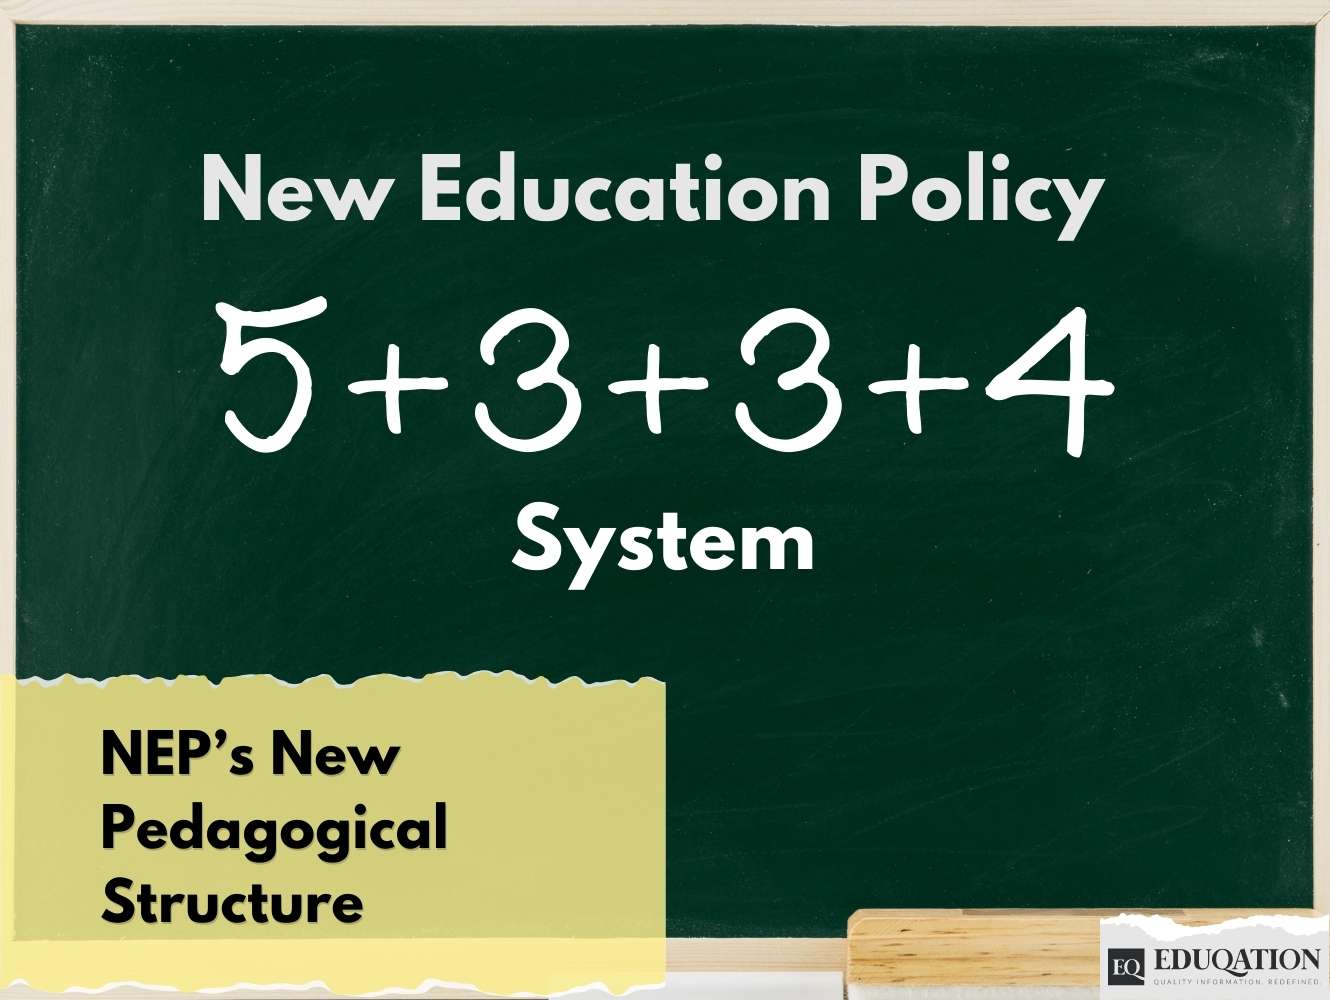 NEP’s New Pedagogical Structure